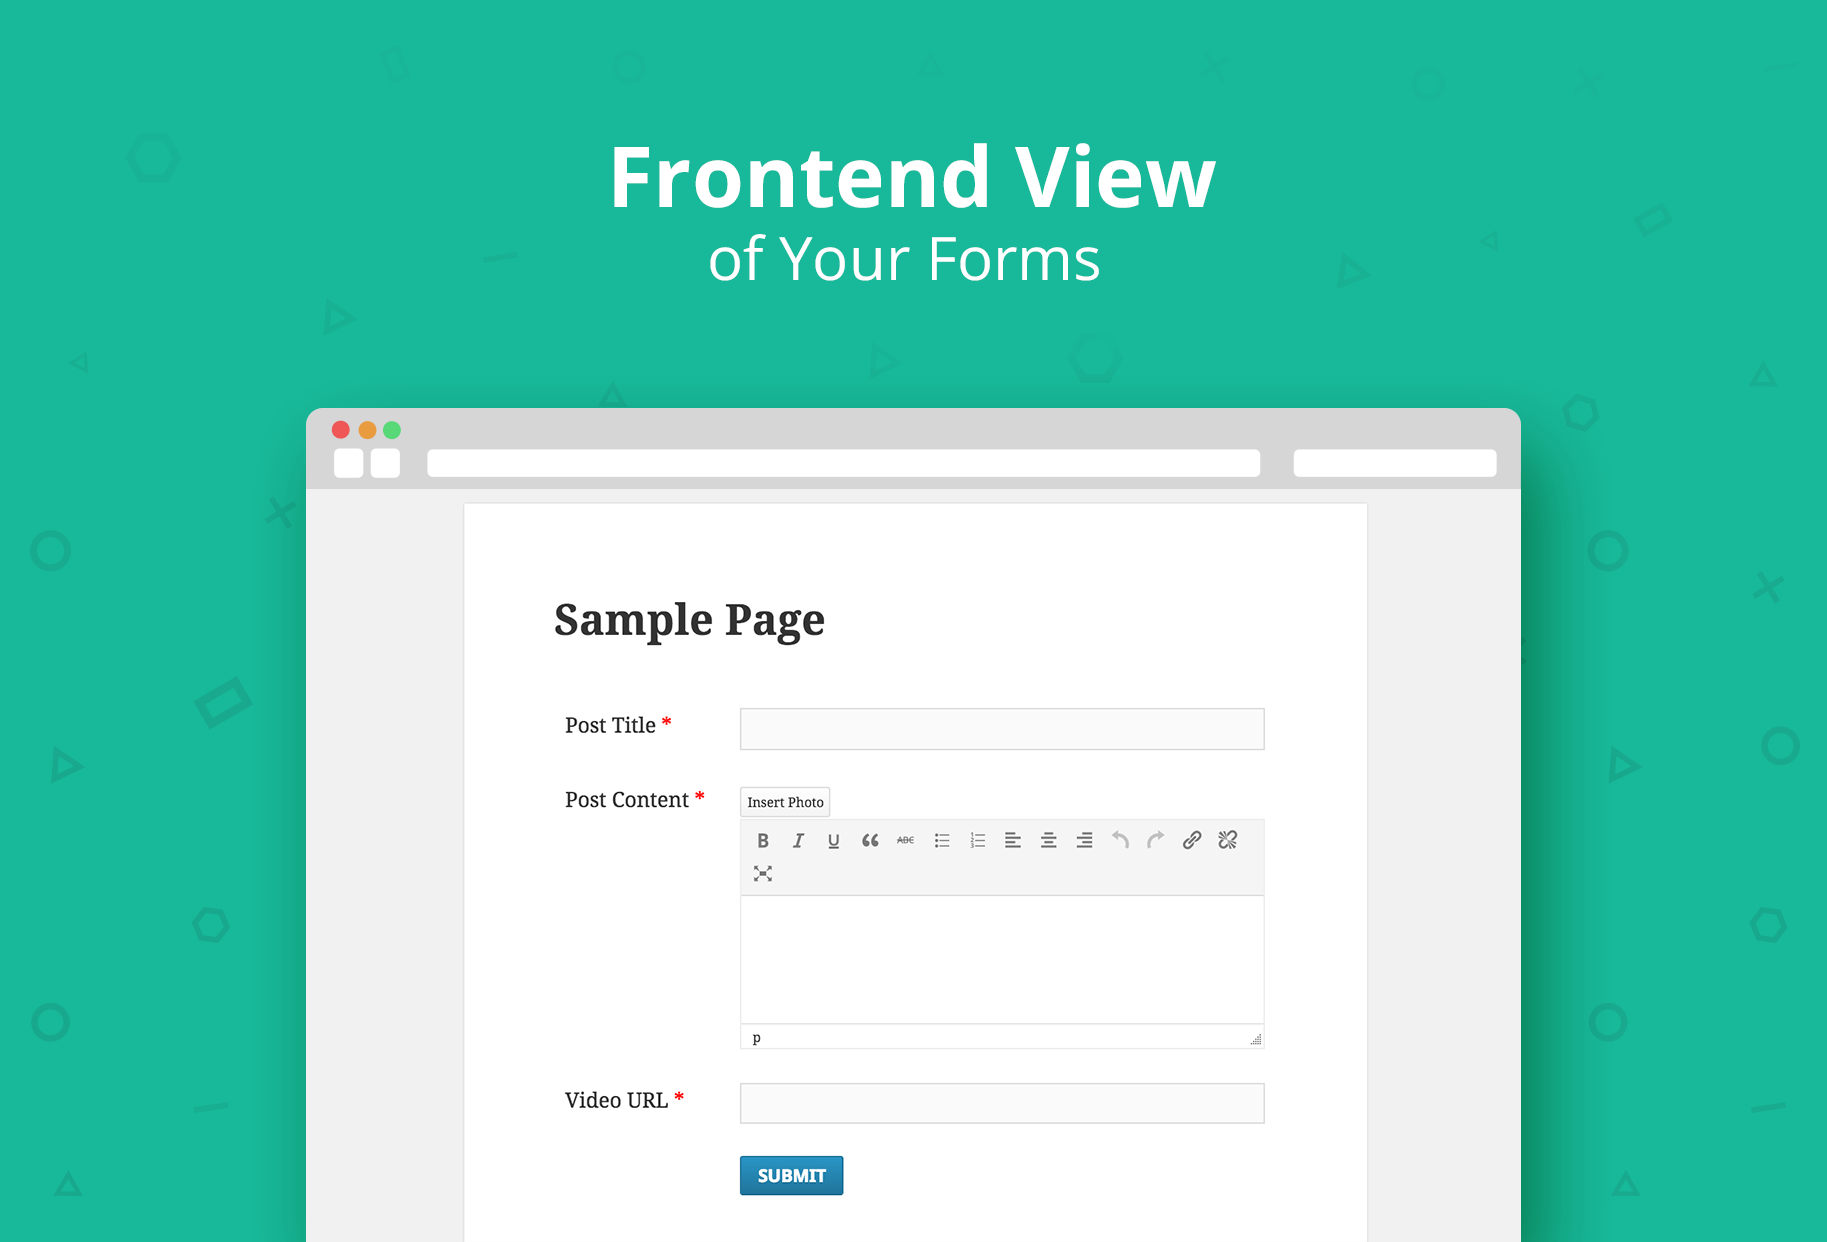 Customize Your Post on the Fly